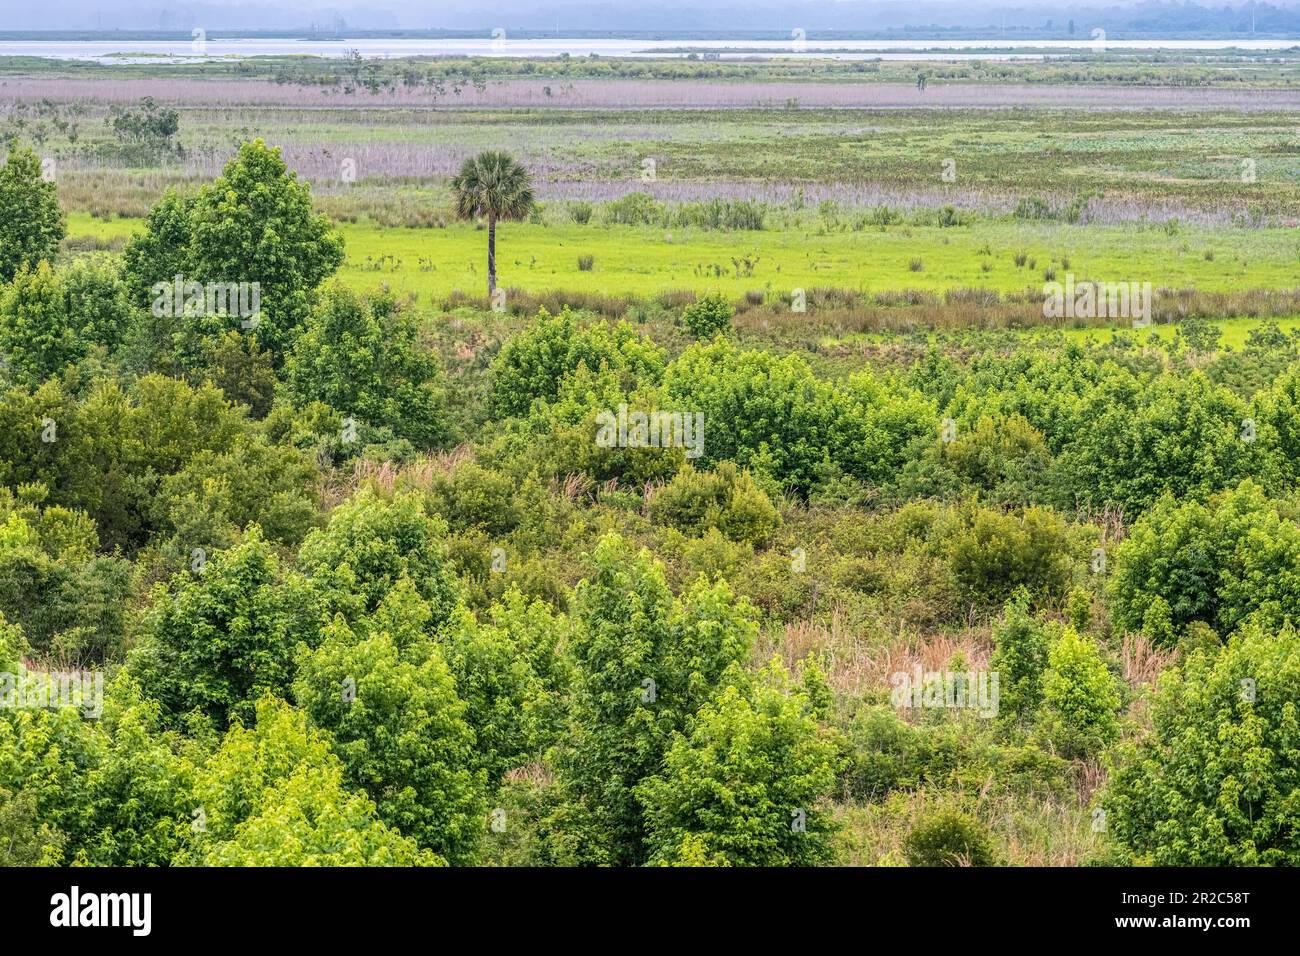 Paynes Prairie Basin, home of wild horses, wild buffalo, and other wildlife at Paynes Prairie Preserve State Park in Micanopy, Florida. (USA) Stock Photo